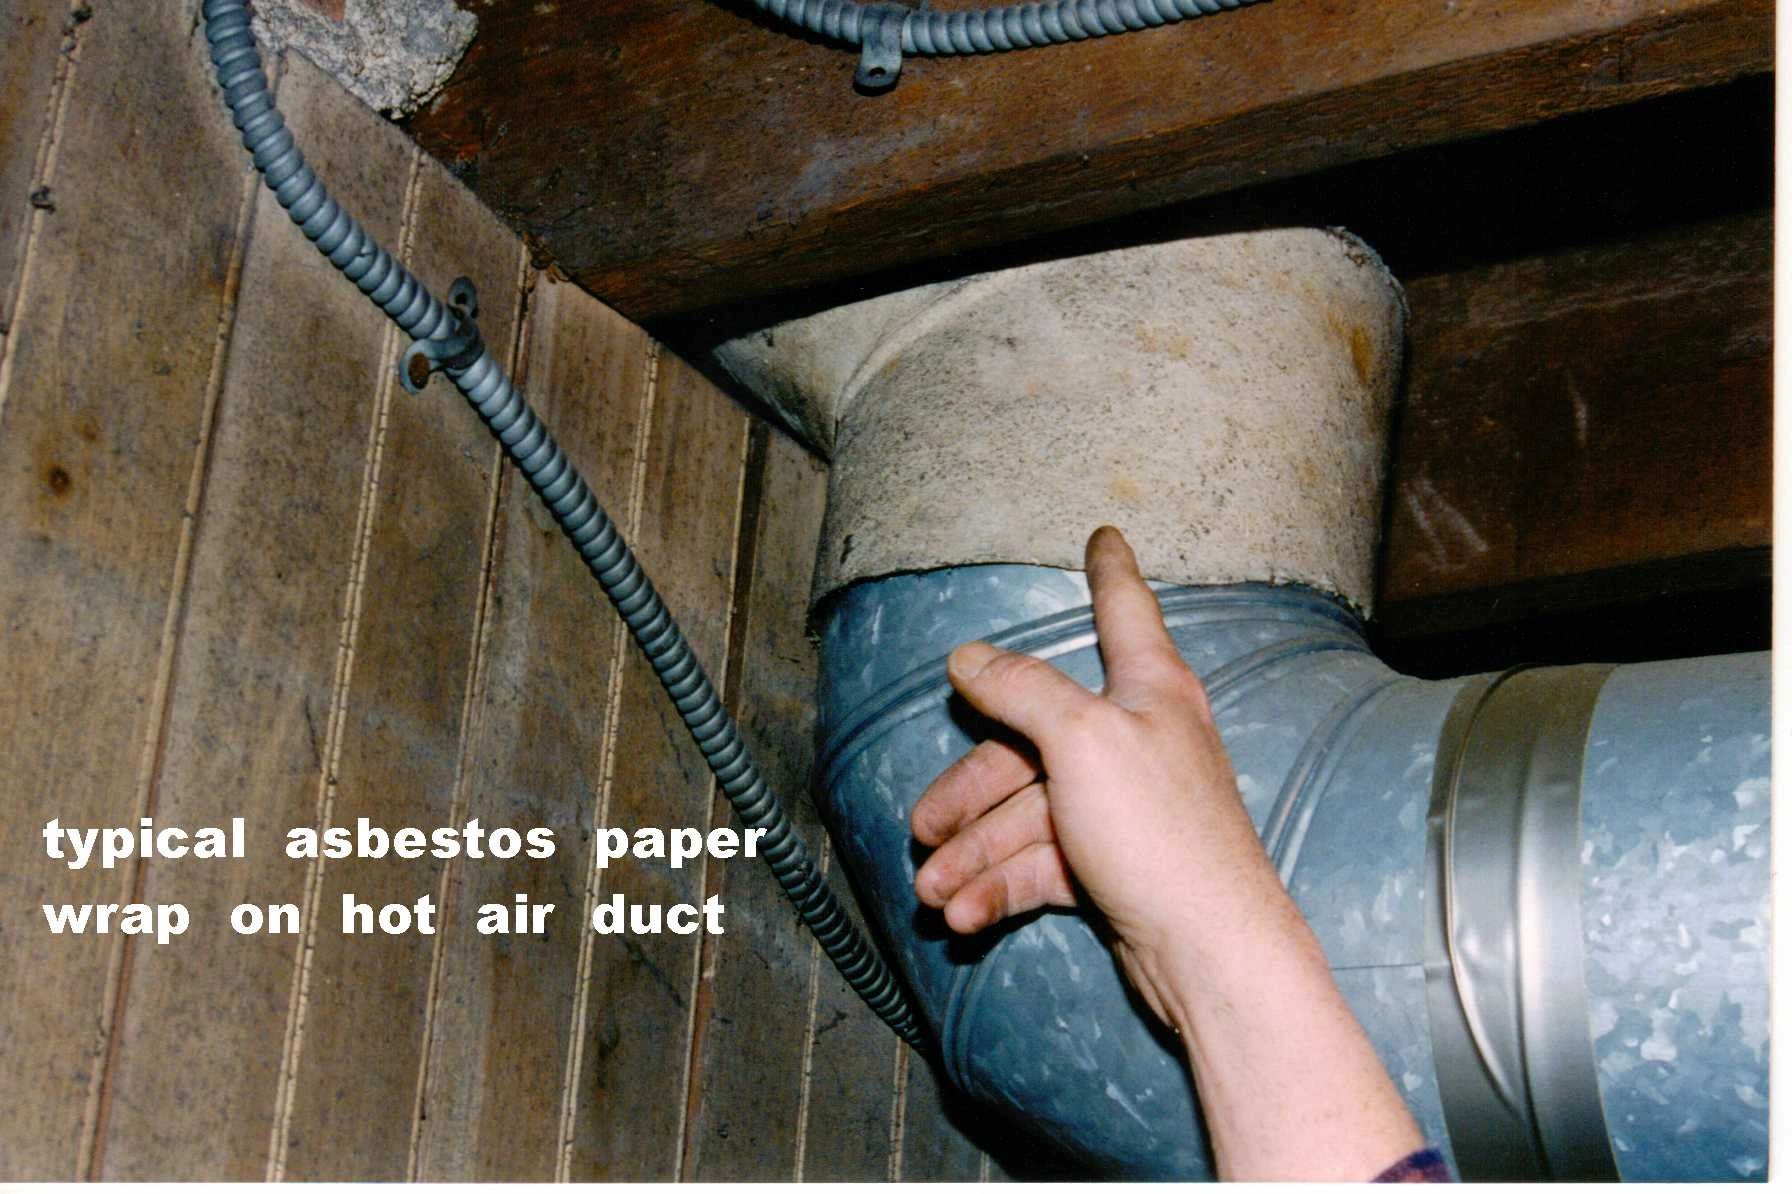 Asbestos thermal paper on a residential heating duct